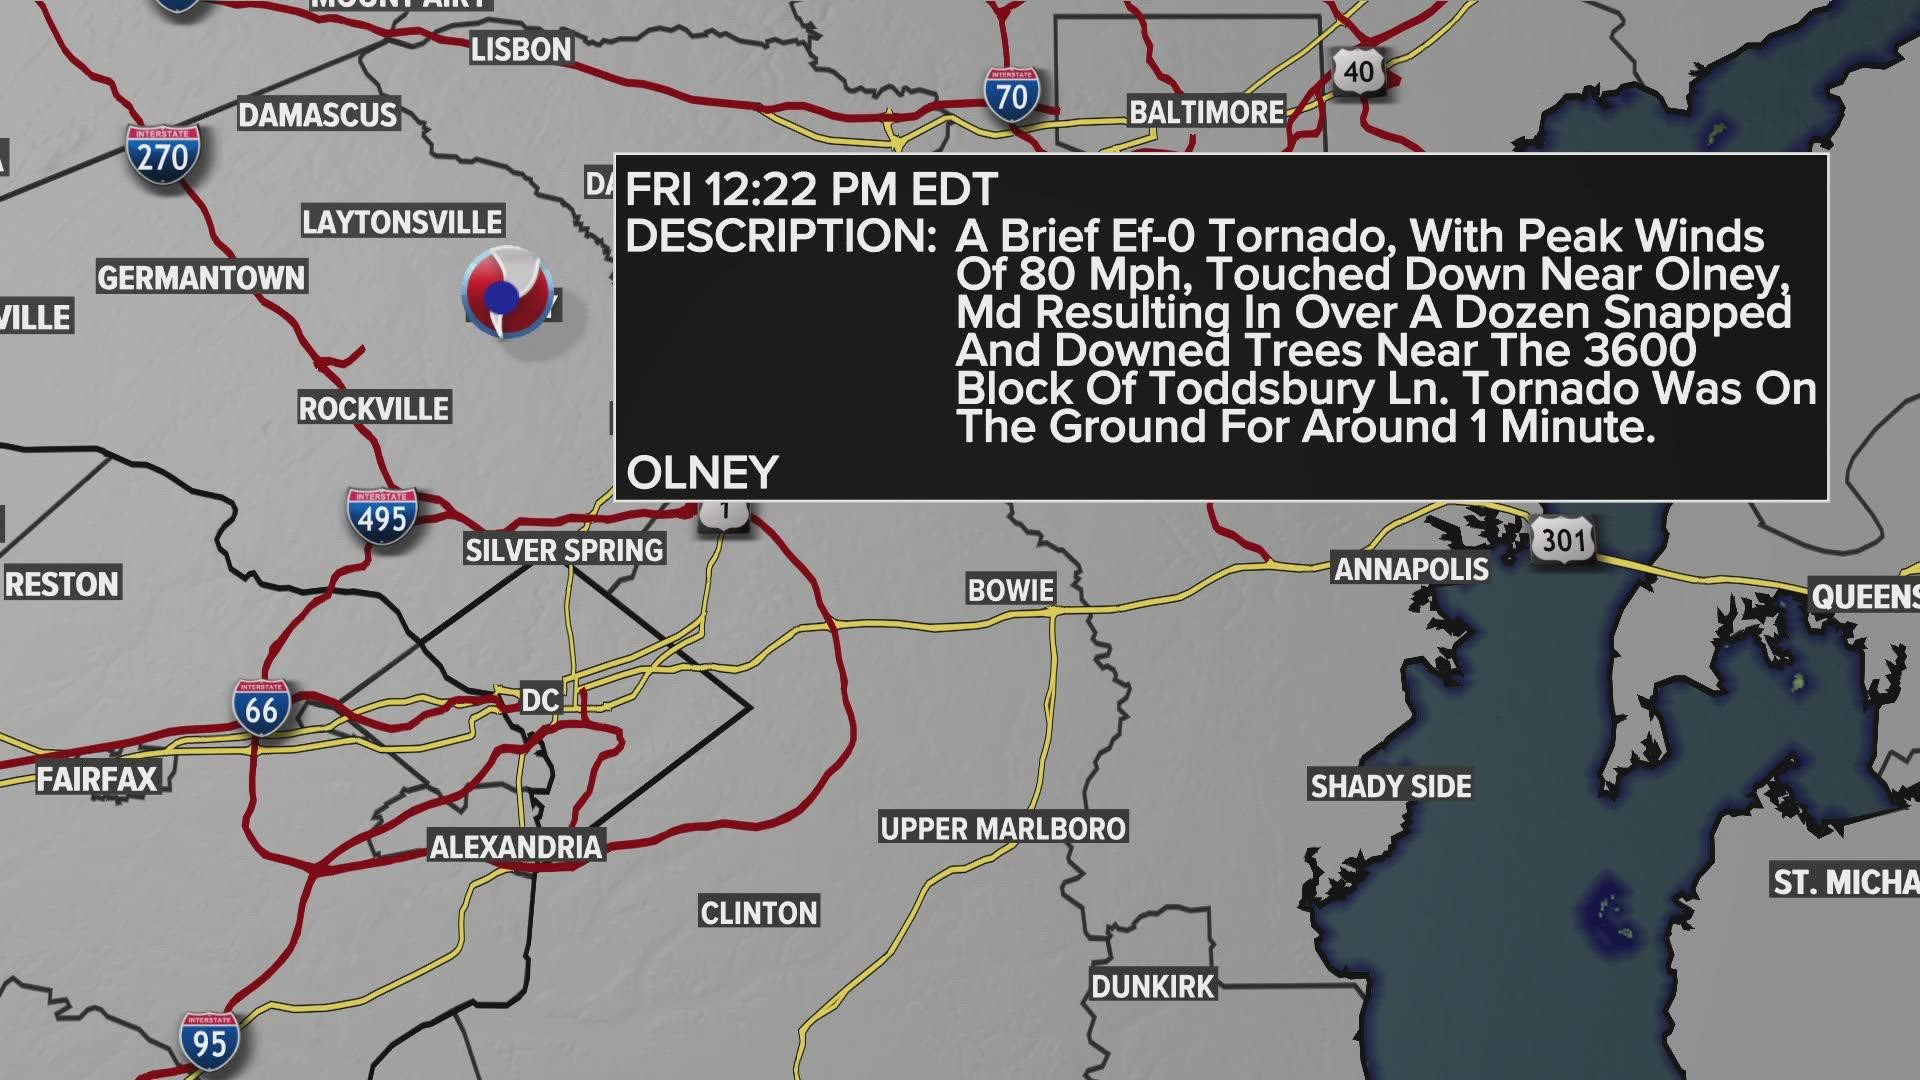 The tornado happened around noon on Friday and it is characterized as an EF-0 Tornado with peak winds of 80 mph.